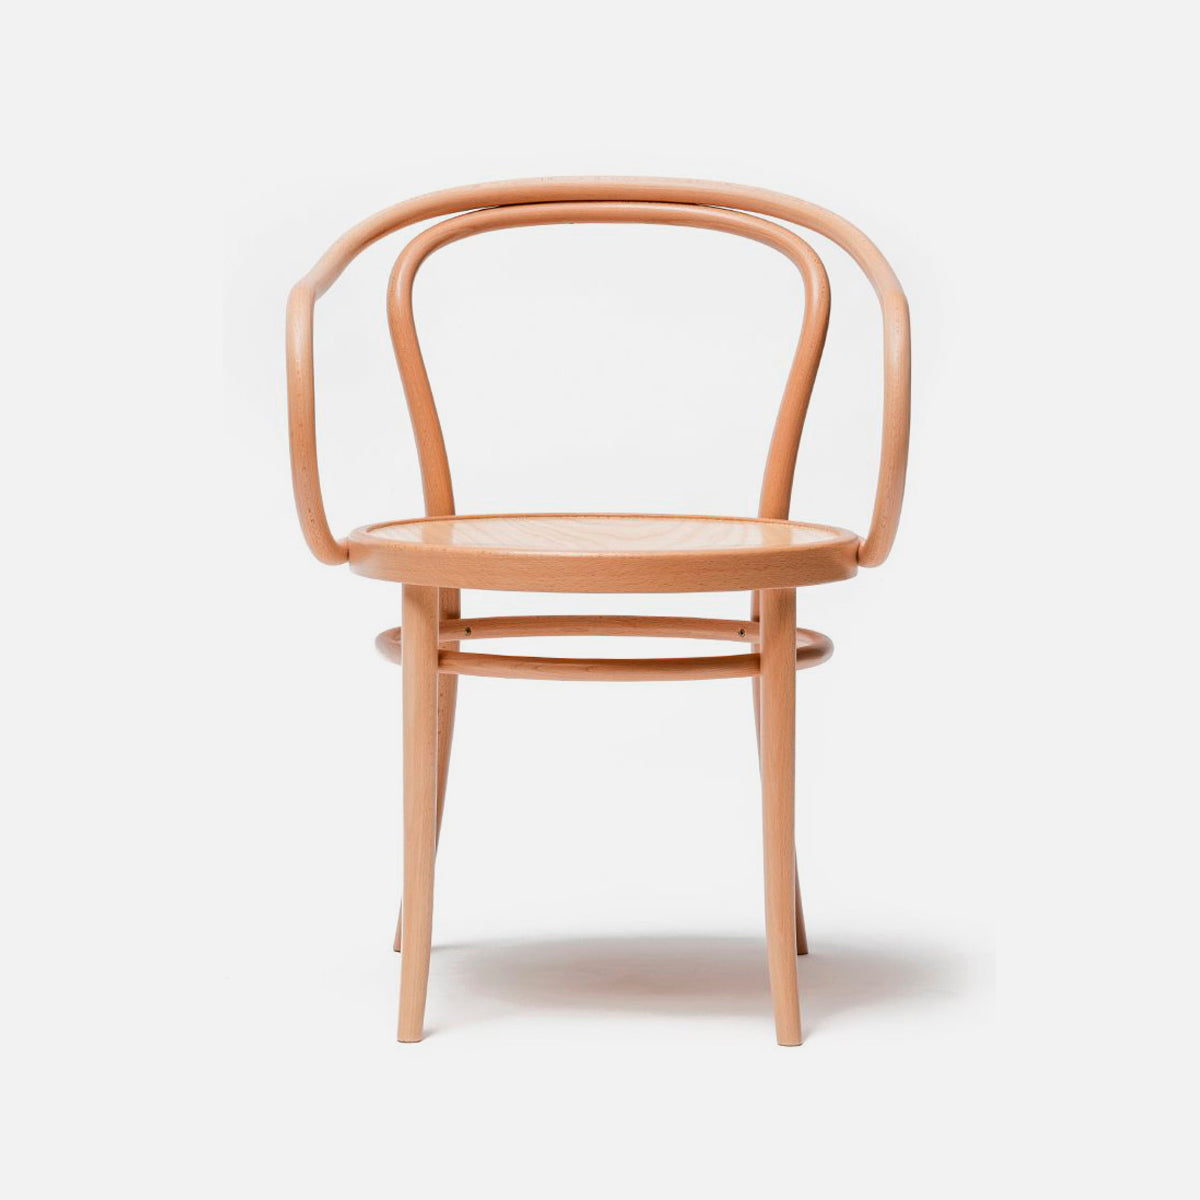 No.30 Arm Natural Le Corbusier Chair コルビジェチェア – D9 STUDIO